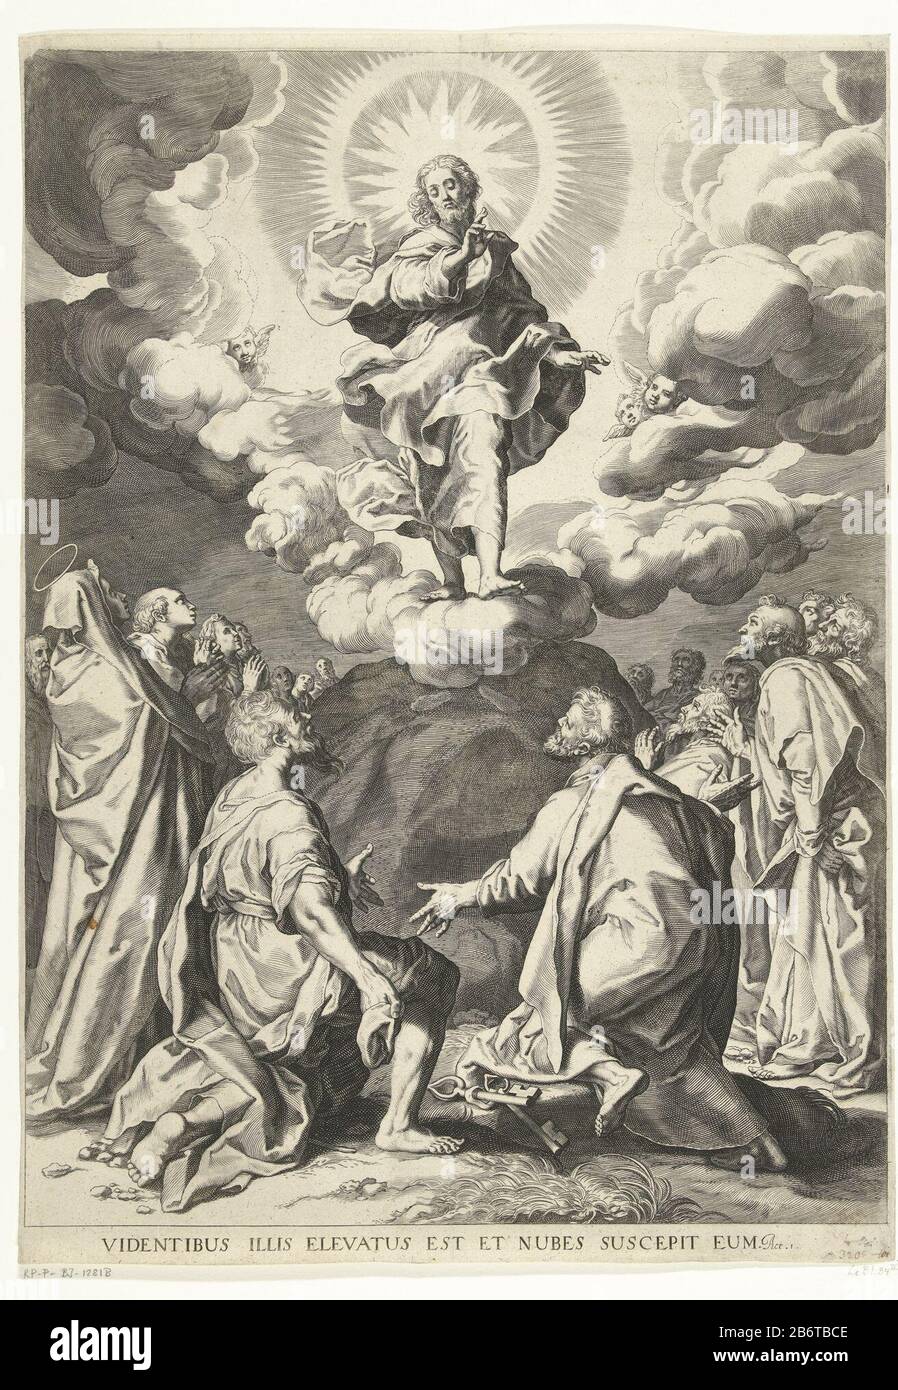 Hemelvaart van Christus The Appearance of Christ to the apostles after his resurrection, when he is in a cloud in the sky gevoerd.Onder, the apostles are also Maria. Manufacturer : printmaker Cornelis Bloemaert (II) for painting: Ciro Ferri Place manufacture: Rome Date: 1656 - 1692 Physical features: engra material: paper Technique: engra (printing process) Measurements: sheet: h 490 mm × W 350 mm Subject: Christ ascends into heaven; apostles (and Mary) beneath Stock Photo